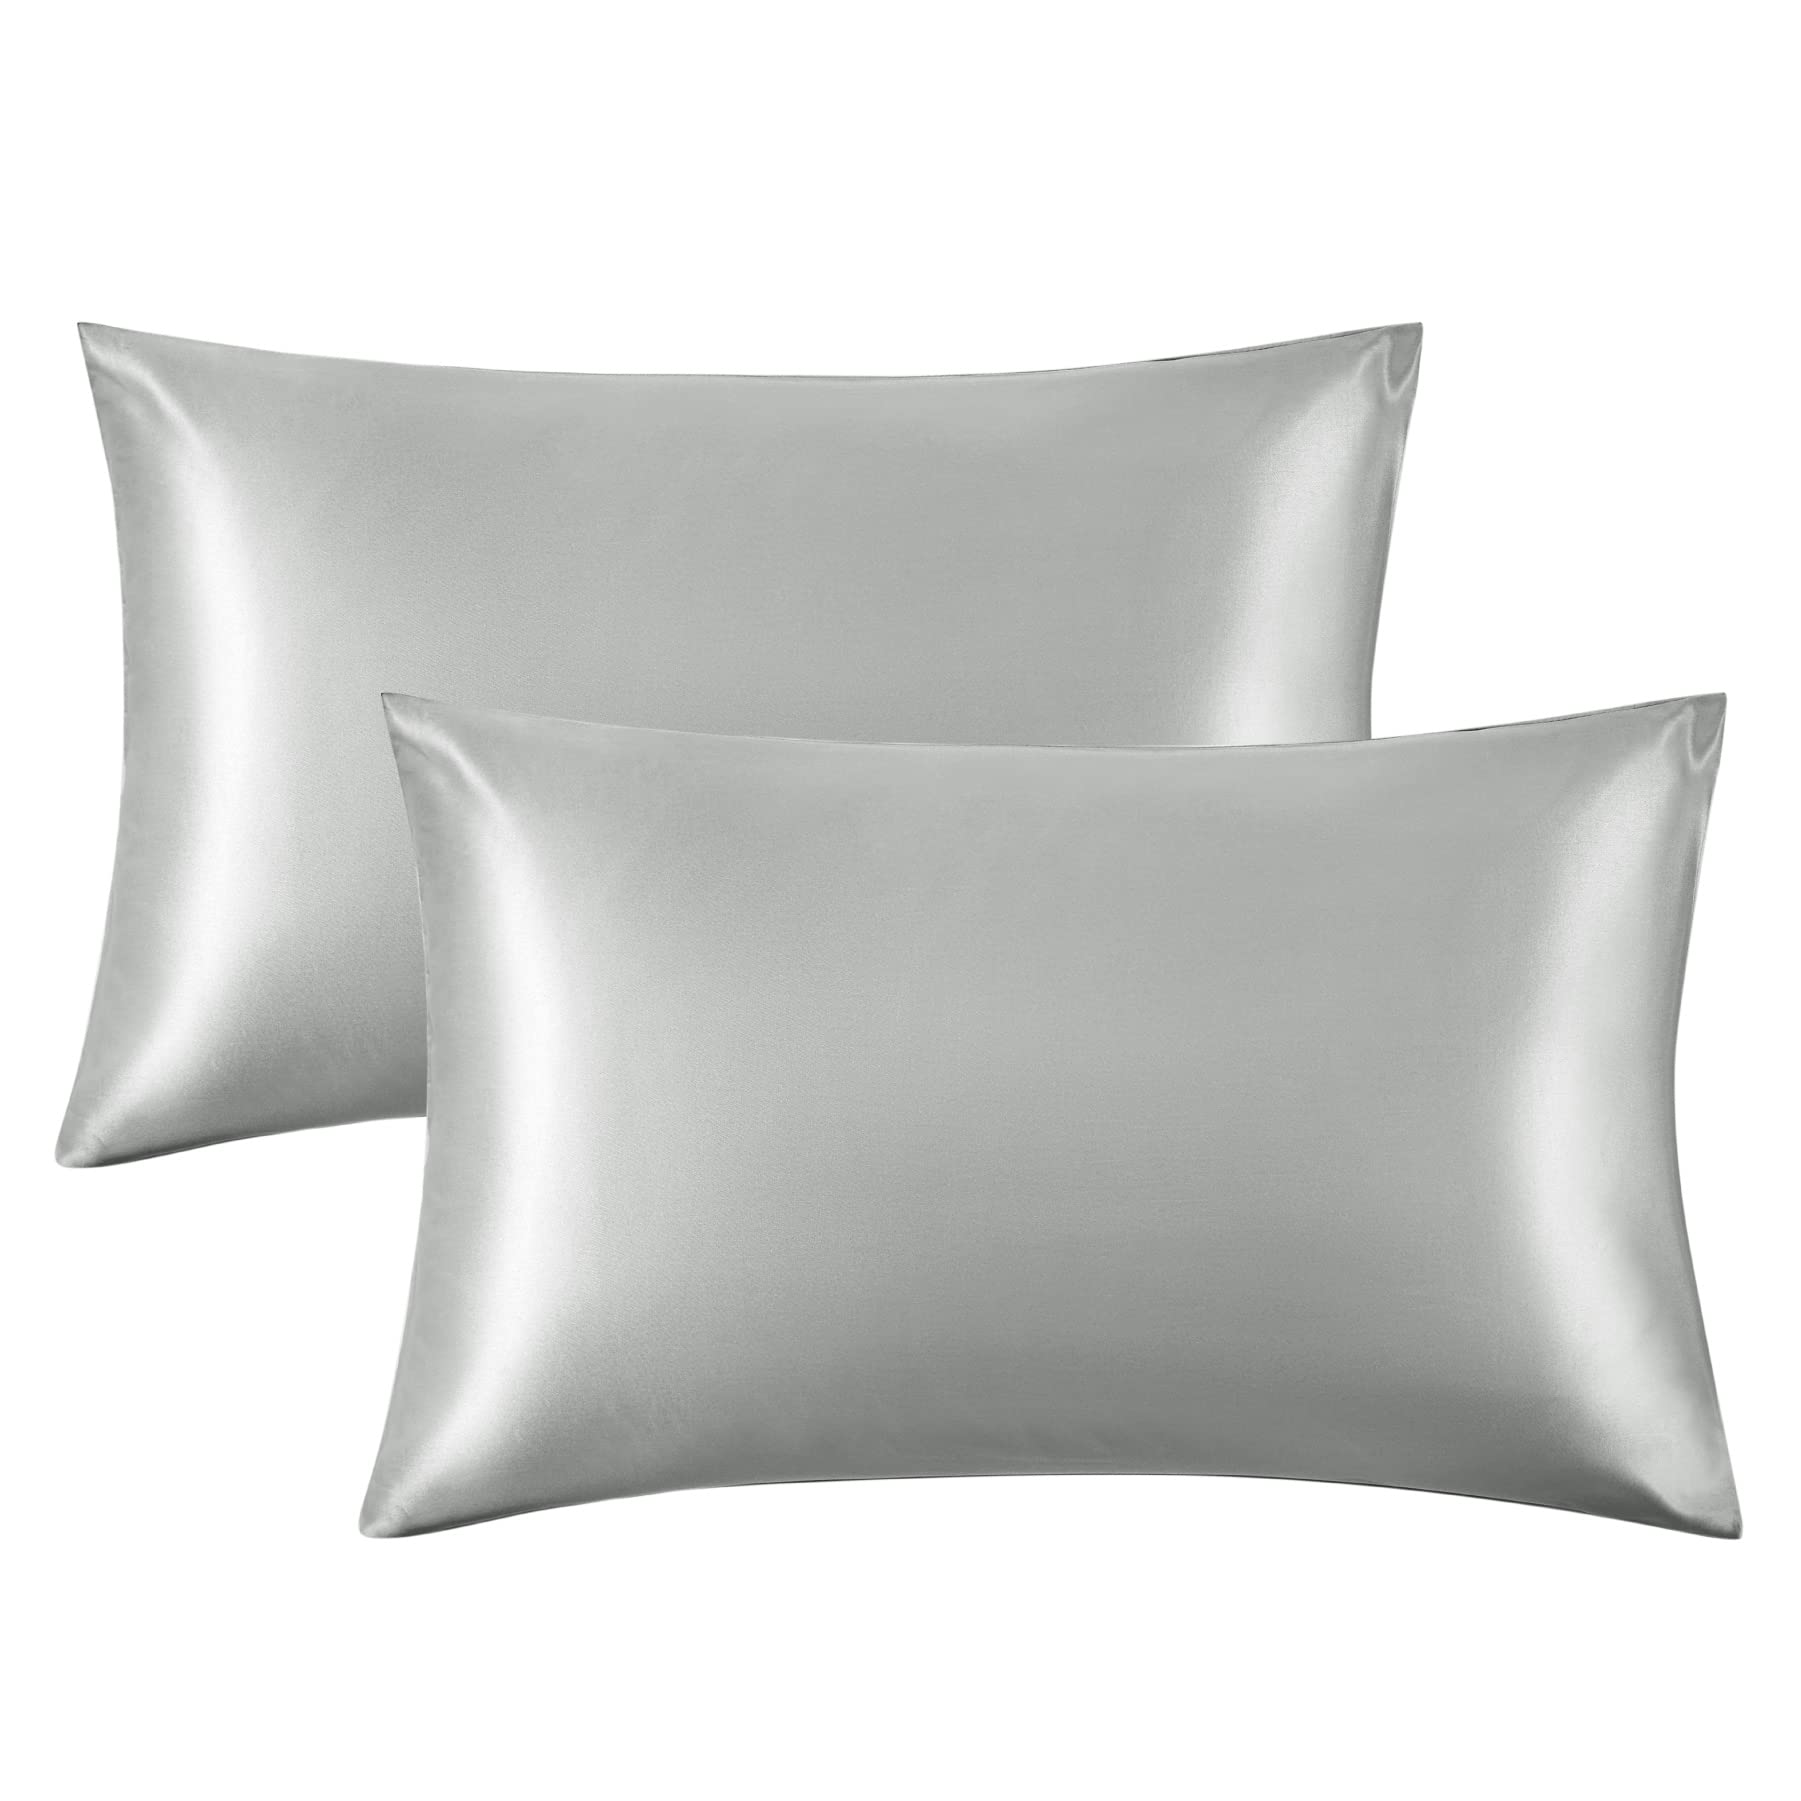 Bedsure Satin Pillow Cases 2 Pack - Grey Pillowcase for Hair and Skin Standard Size with Envelope Closure, 50 x 75 cm